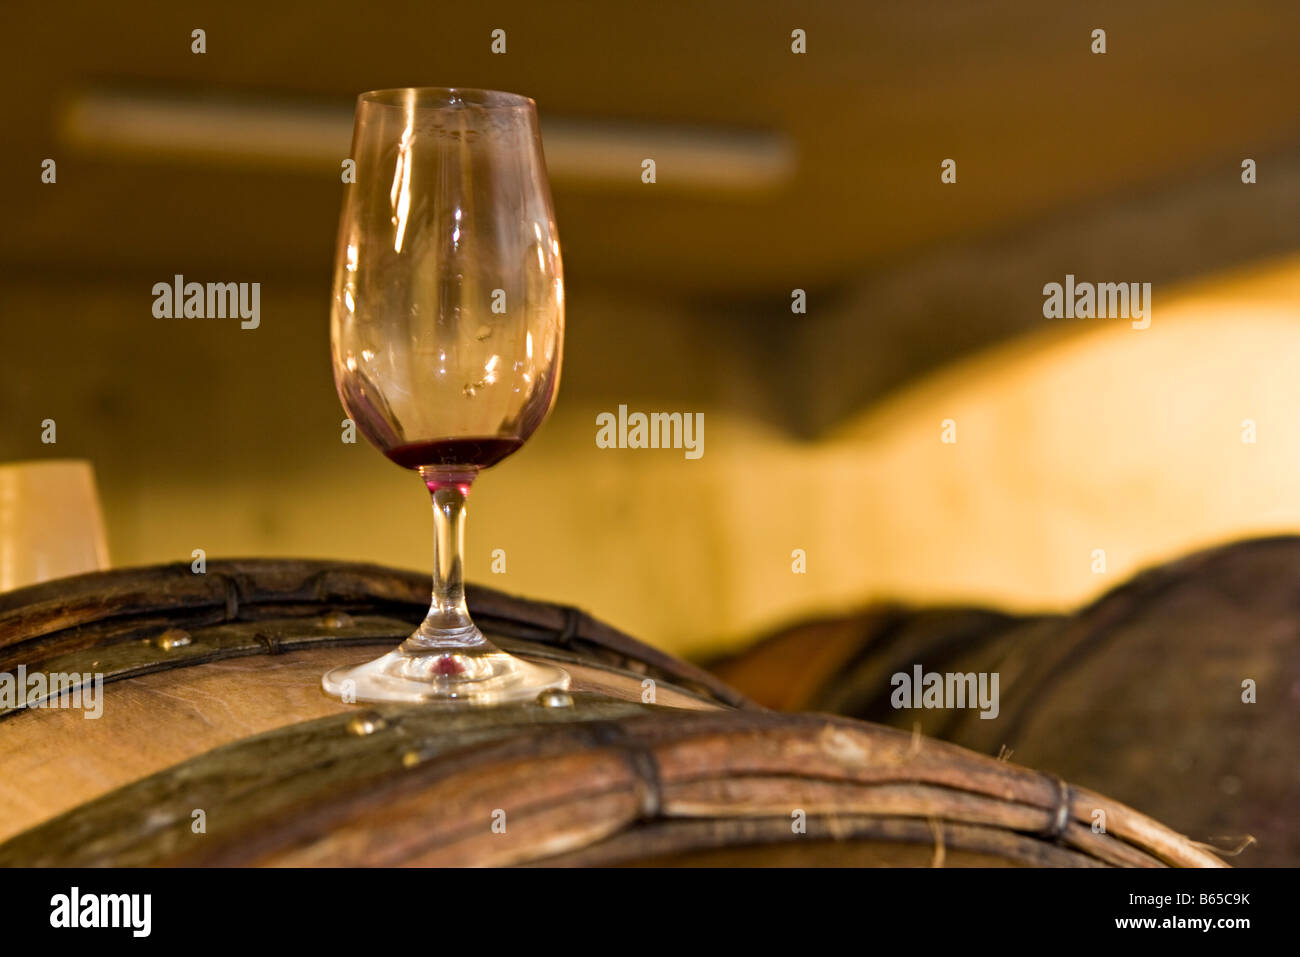 Empty wine glass stained with red wine placed on wine barrel Stock Photo